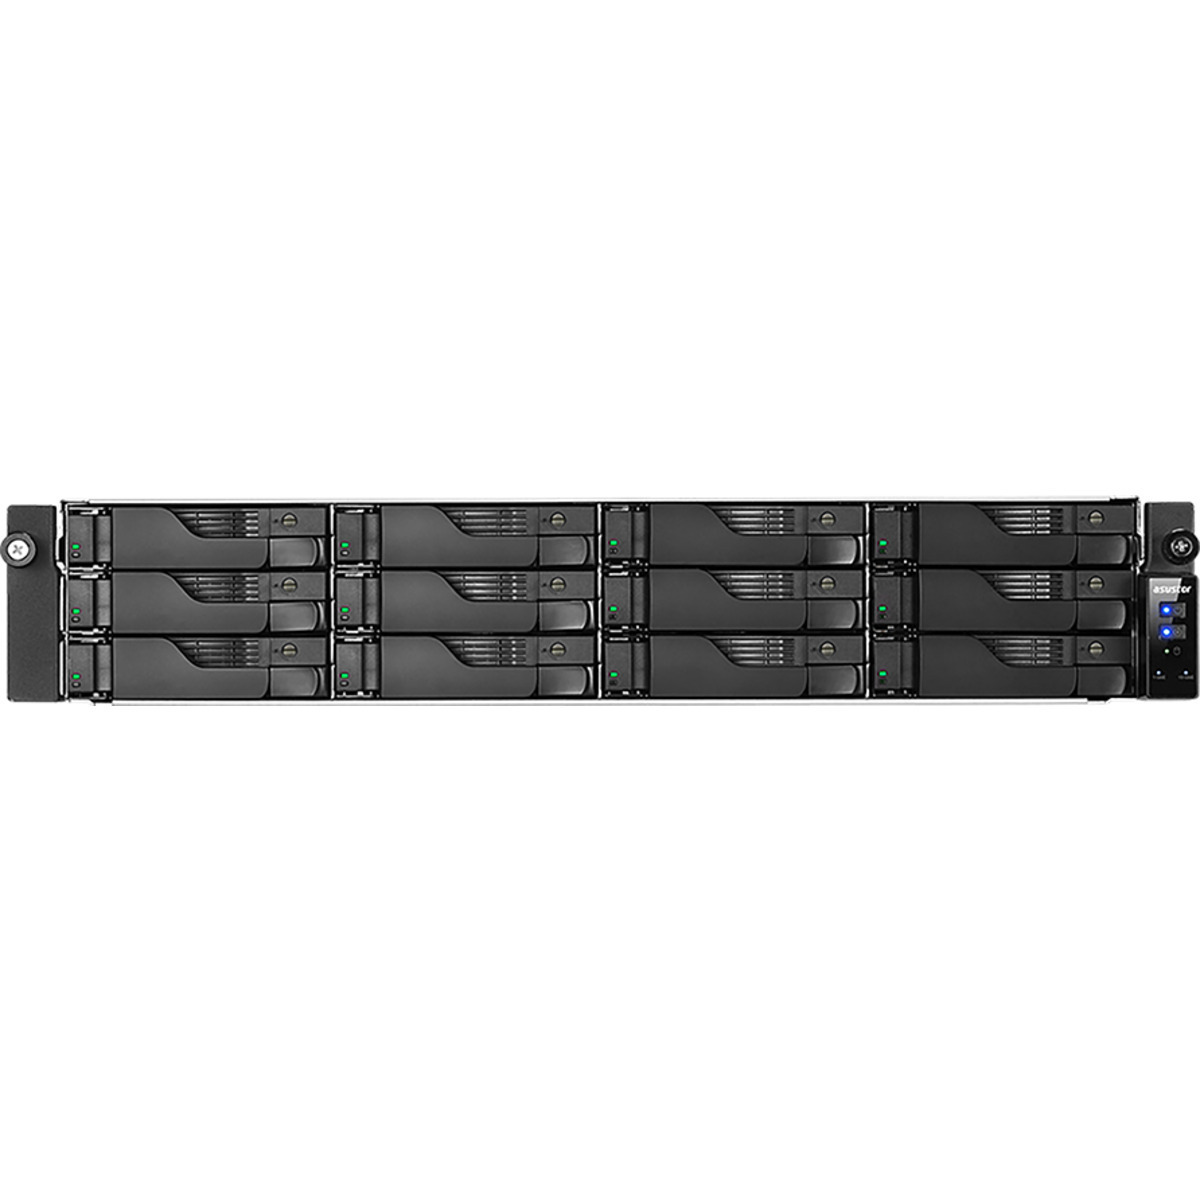 ASUSTOR LOCKERSTOR 12RD AS6512RD 28tb 12-Bay RackMount Multimedia / Power User / Business NAS - Network Attached Storage Device 7x4tb Seagate IronWolf ST4000VN006 3.5 5400rpm SATA 6Gb/s HDD NAS Class Drives Installed - Burn-In Tested - FREE RAM UPGRADE LOCKERSTOR 12RD AS6512RD